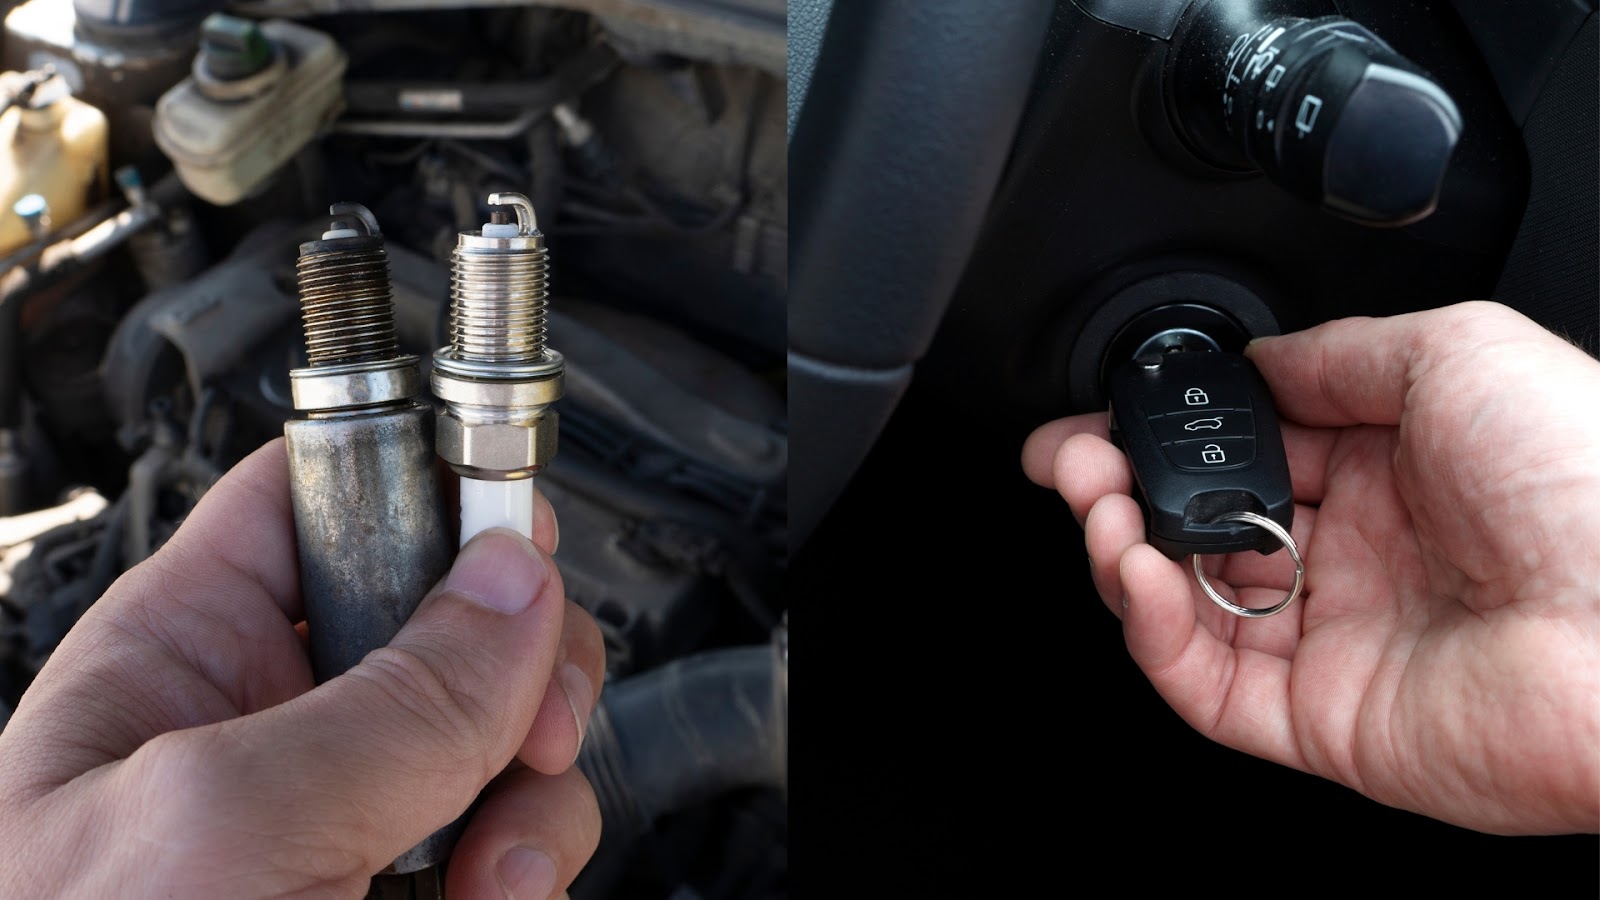 A technician showing the internal and external hardware of a  car ignition